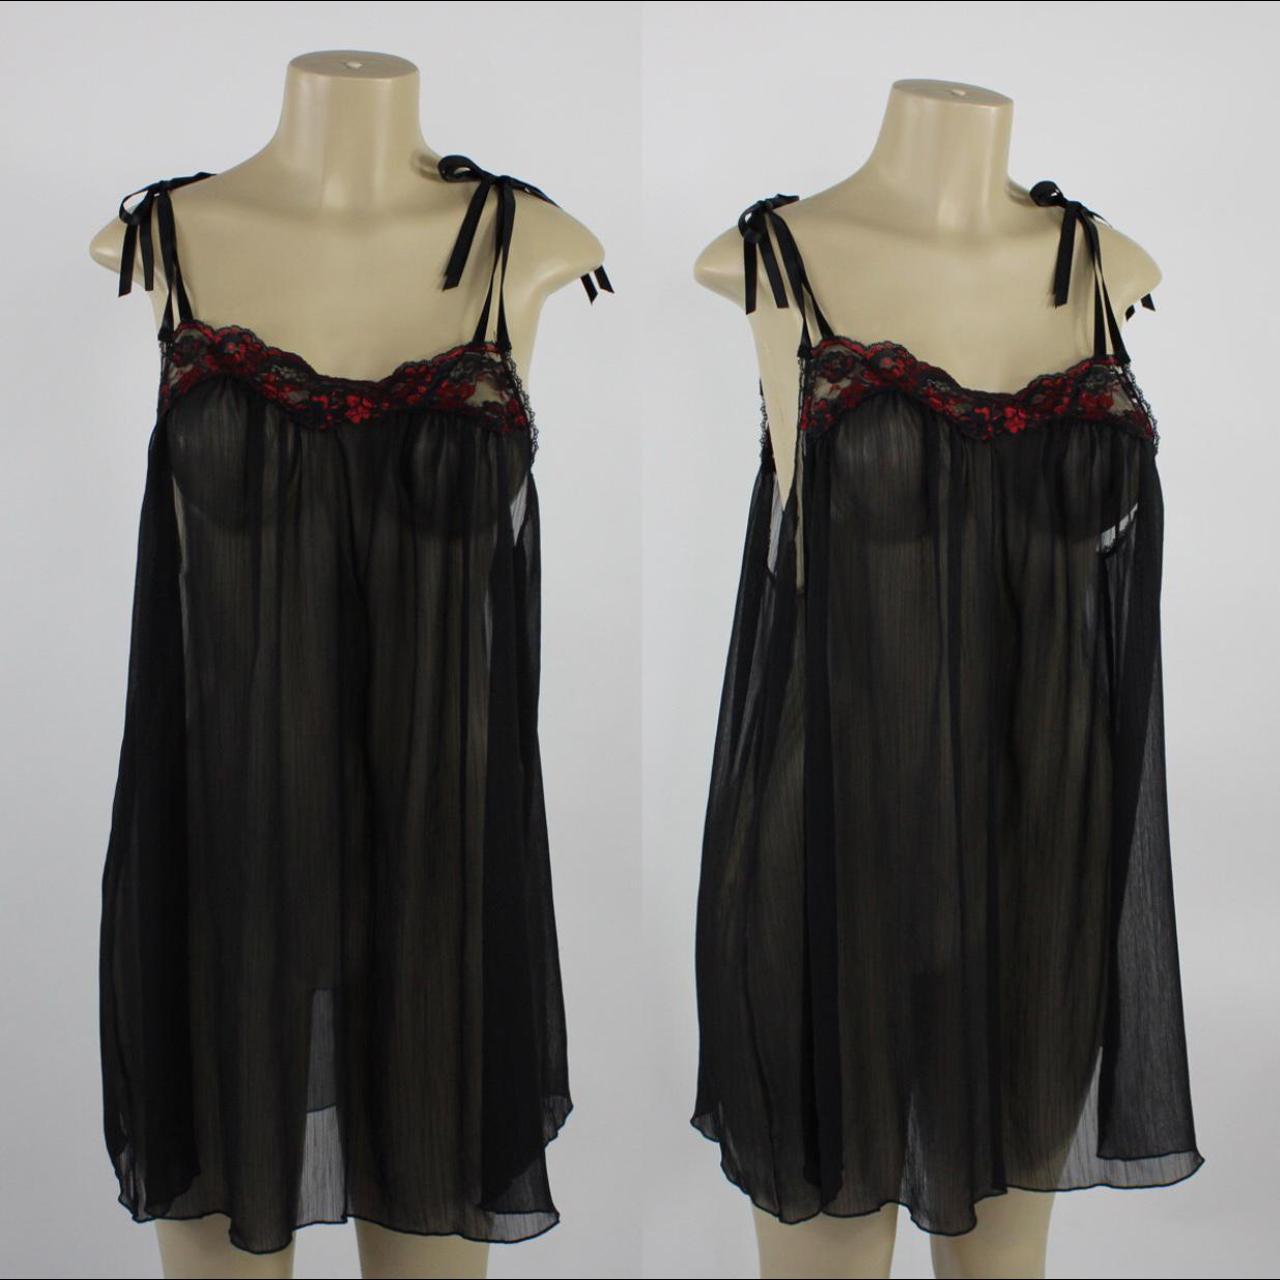 Product Image 1 - Vintage red and black sheer